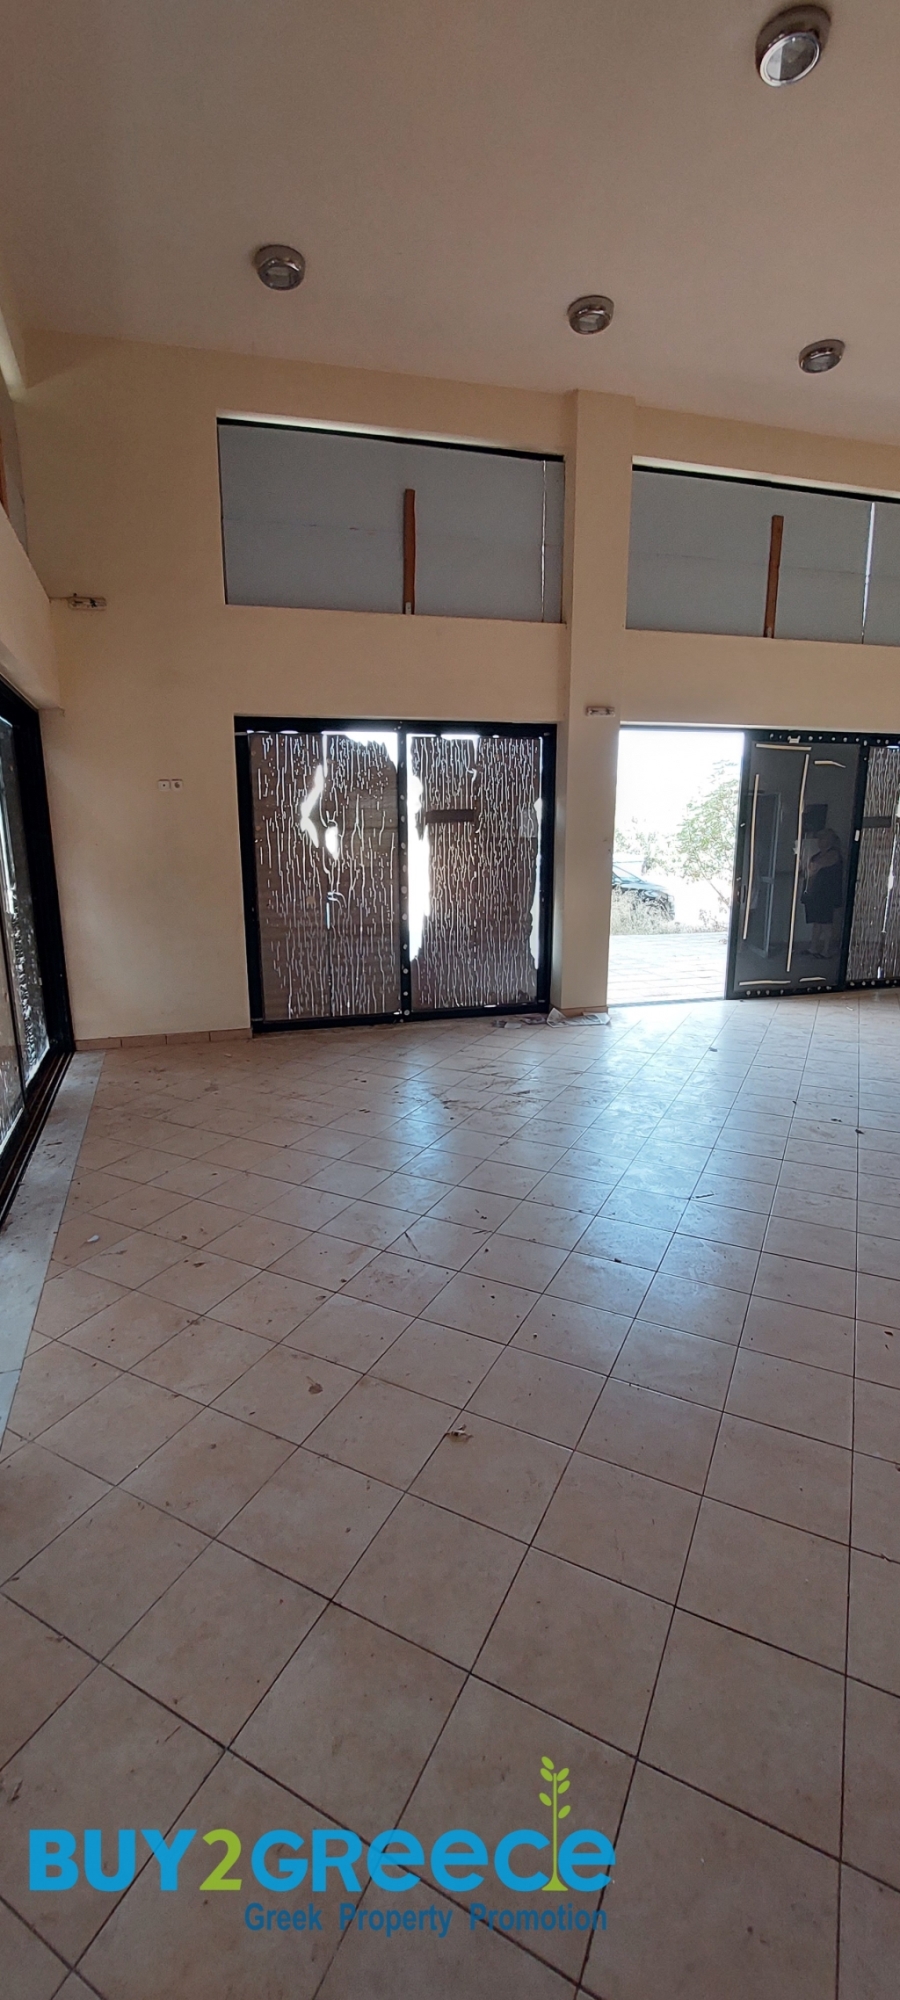 (For Rent) Commercial Commercial Property || Athens West/Kamatero - 75 Sq.m, 550€ ||| ID :1602887-2